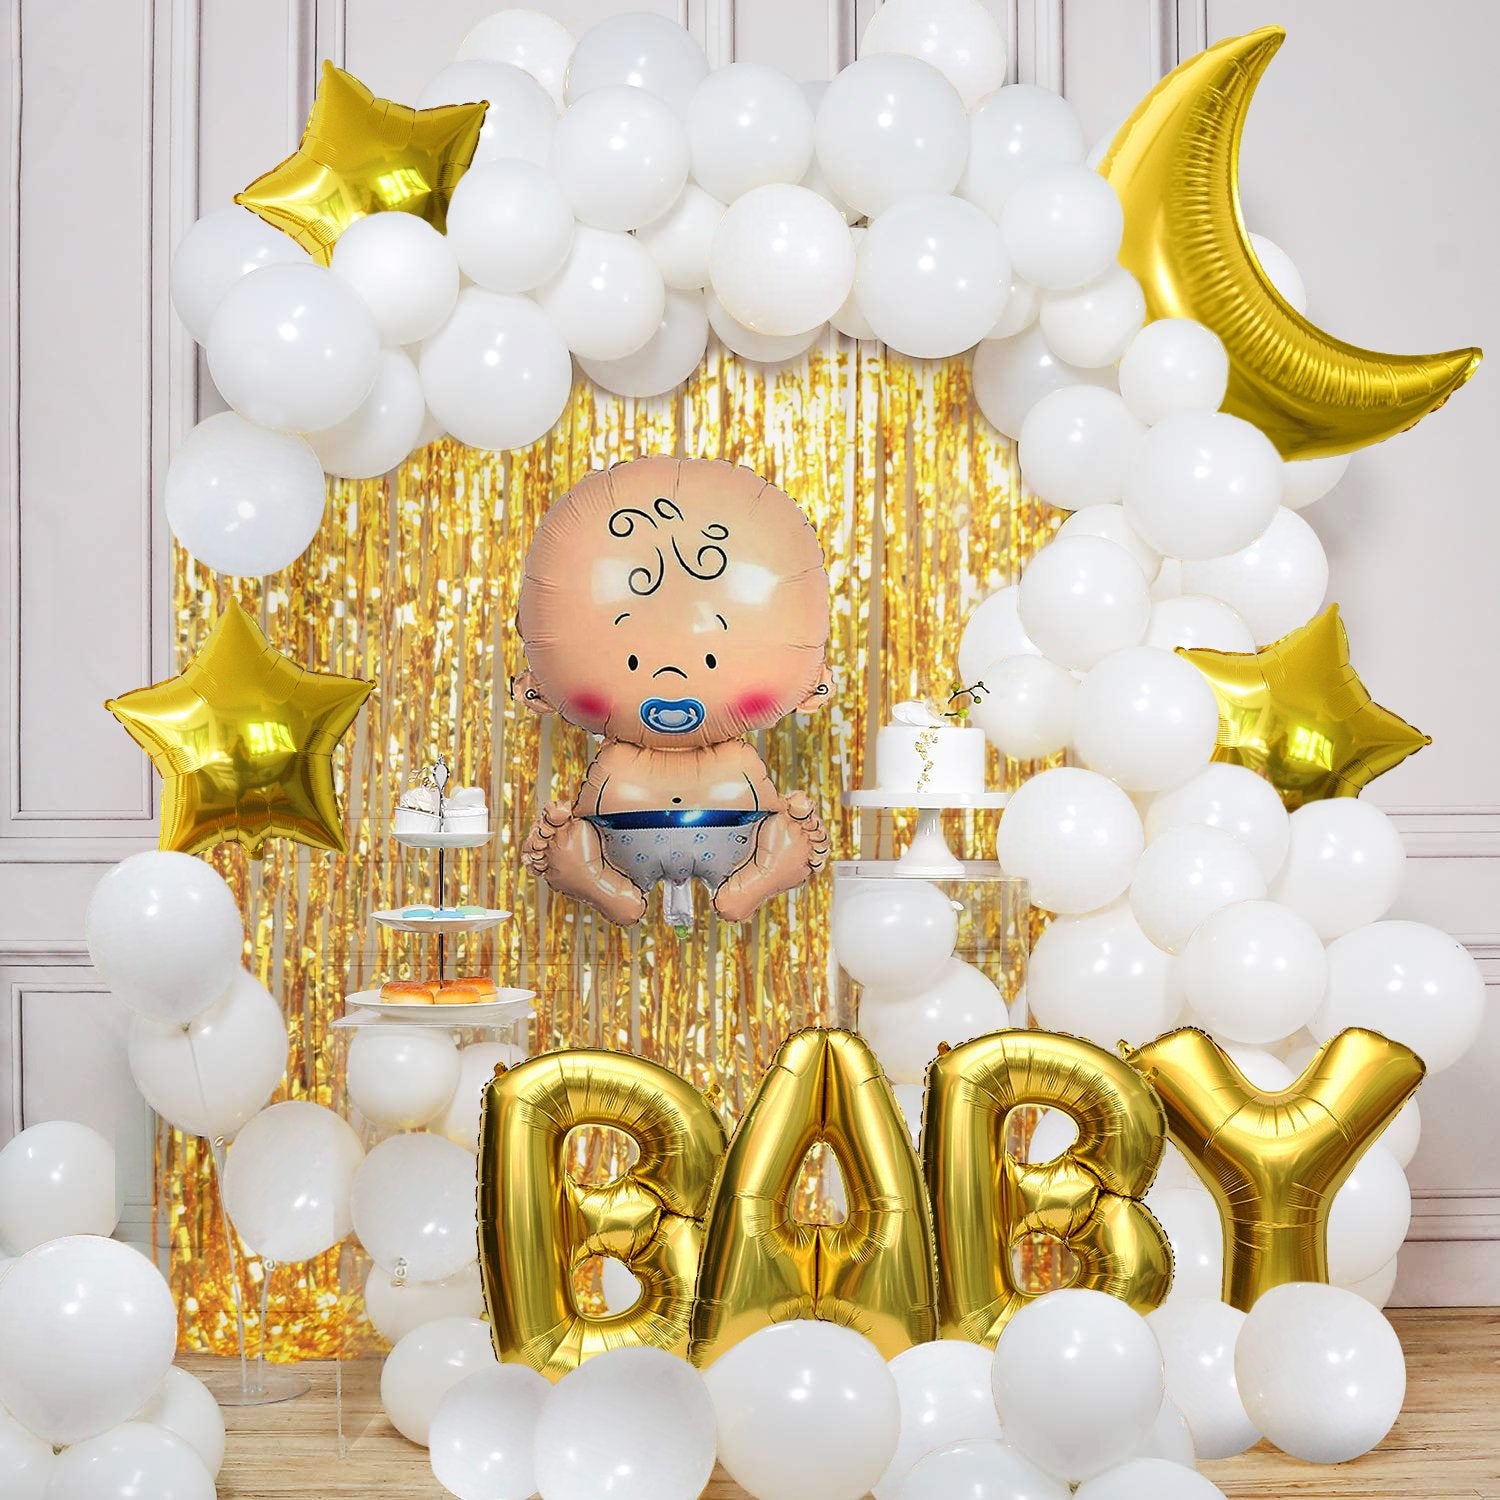 113pcs Welcome Baby Decoration Theme Set For Welcome Home, Baby Shower, Gender Reveal Party Celebration and Decoration